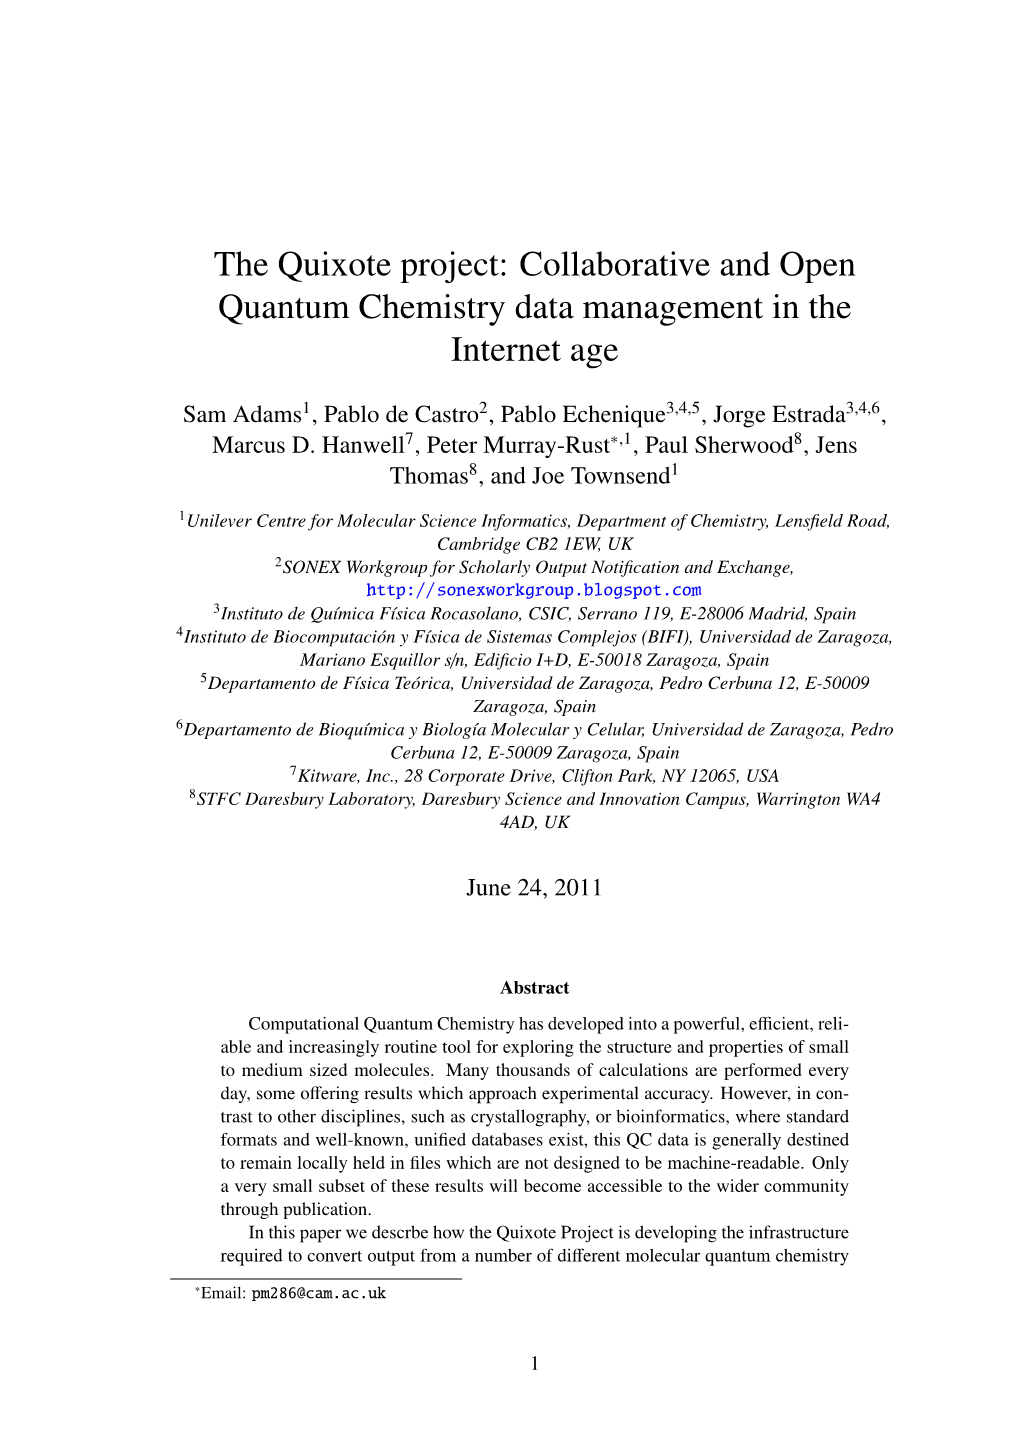 The Quixote Project: Collaborative and Open Quantum Chemistry Data Management in the Internet Age